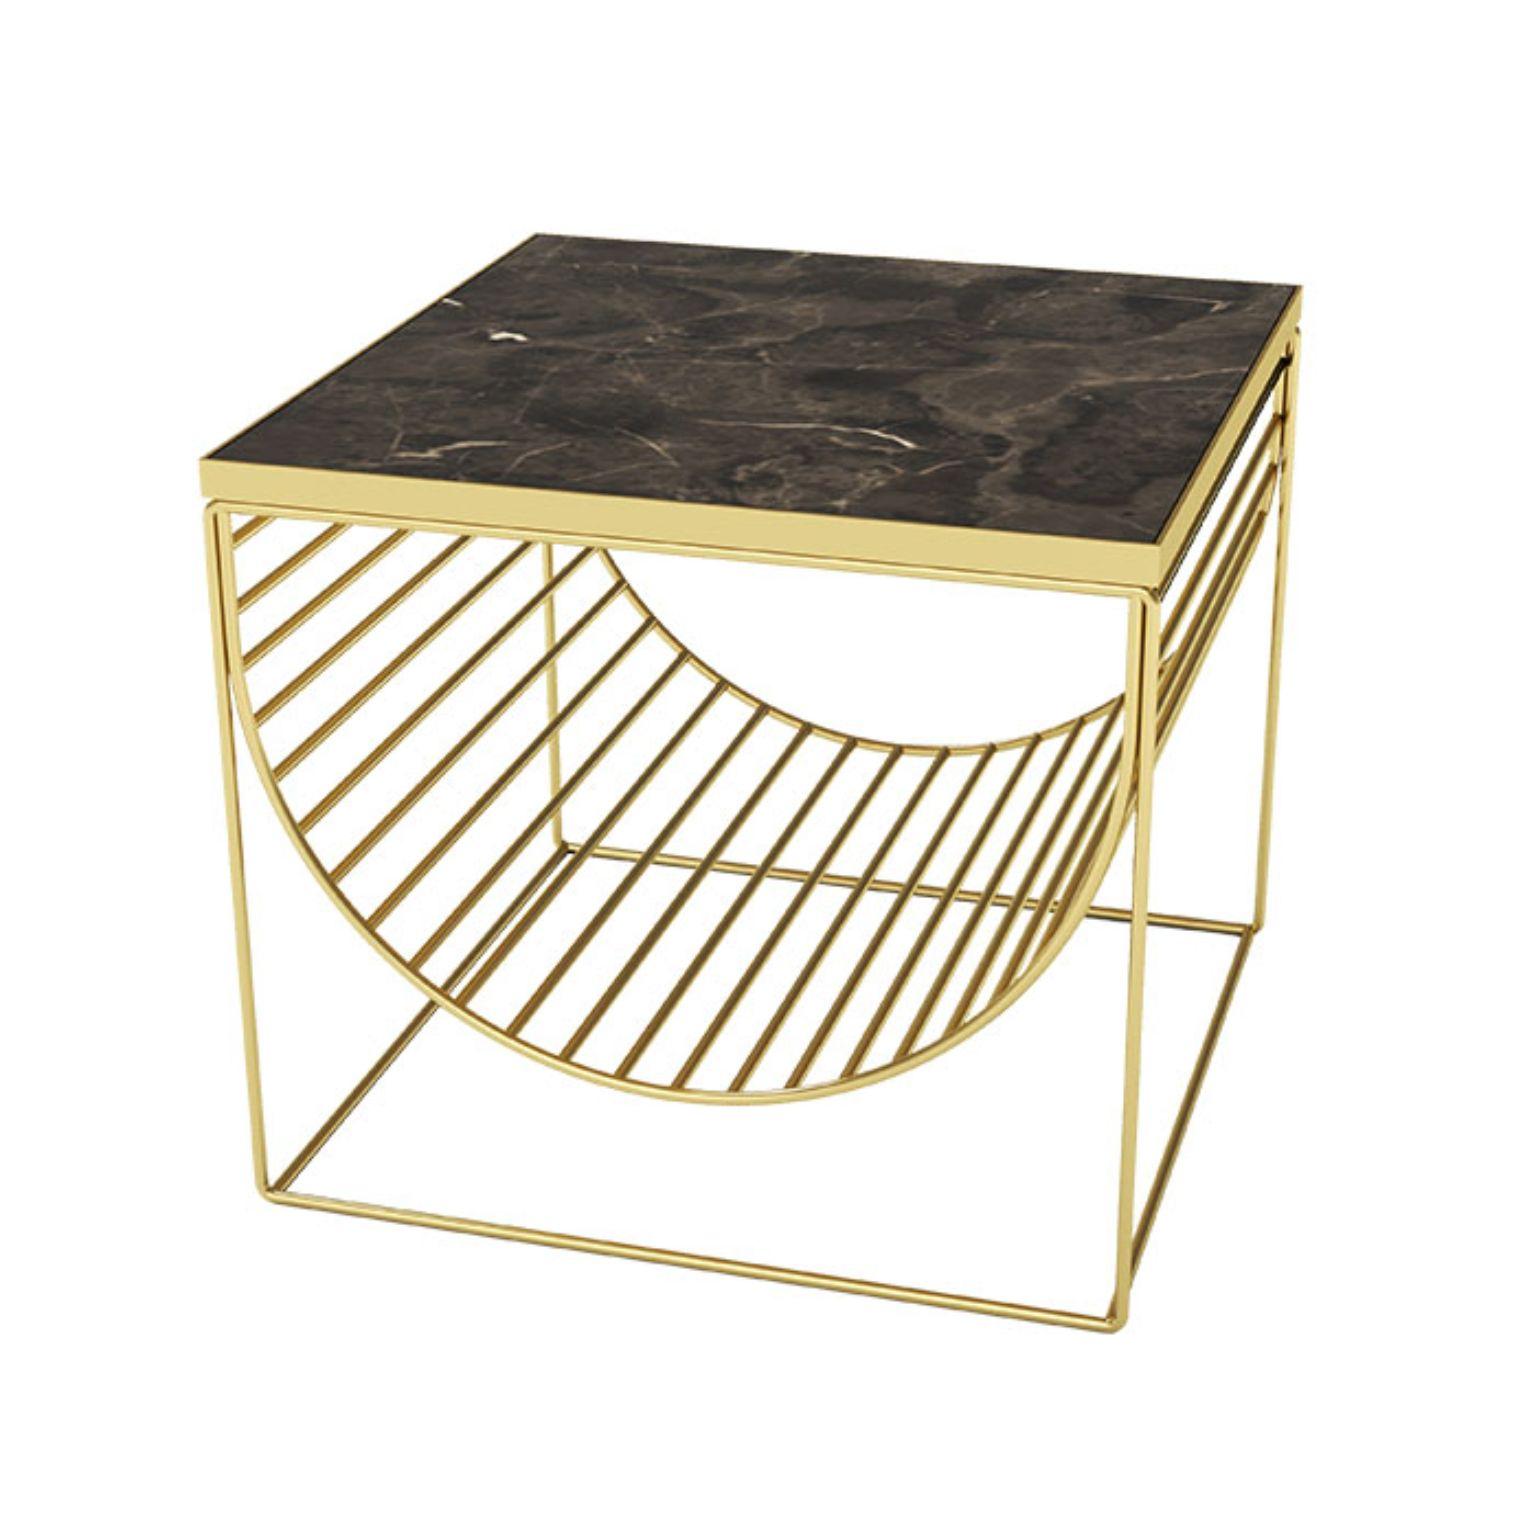 Black marble and gold steel side table
Dimensions: L 50 x W 50 x H 44.3 cm
Materials: Marble, steel

This series consists of three different designs that you can combine in many different ways. The table tops come in two different colored